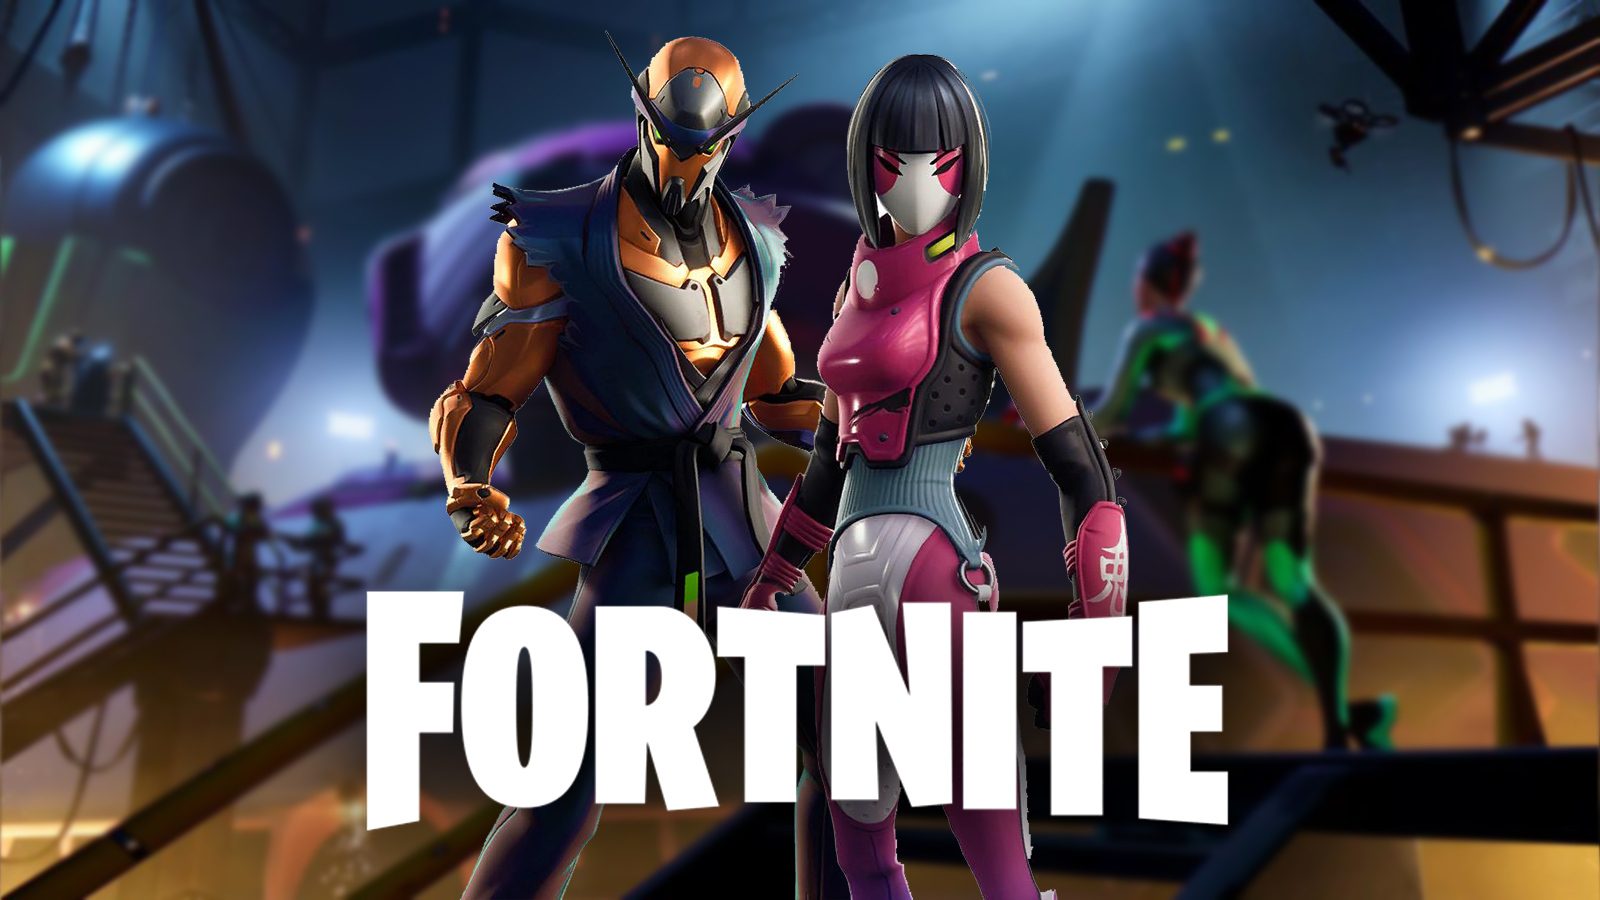 Leaked Fortnite skins and cosmetic items from v940 update